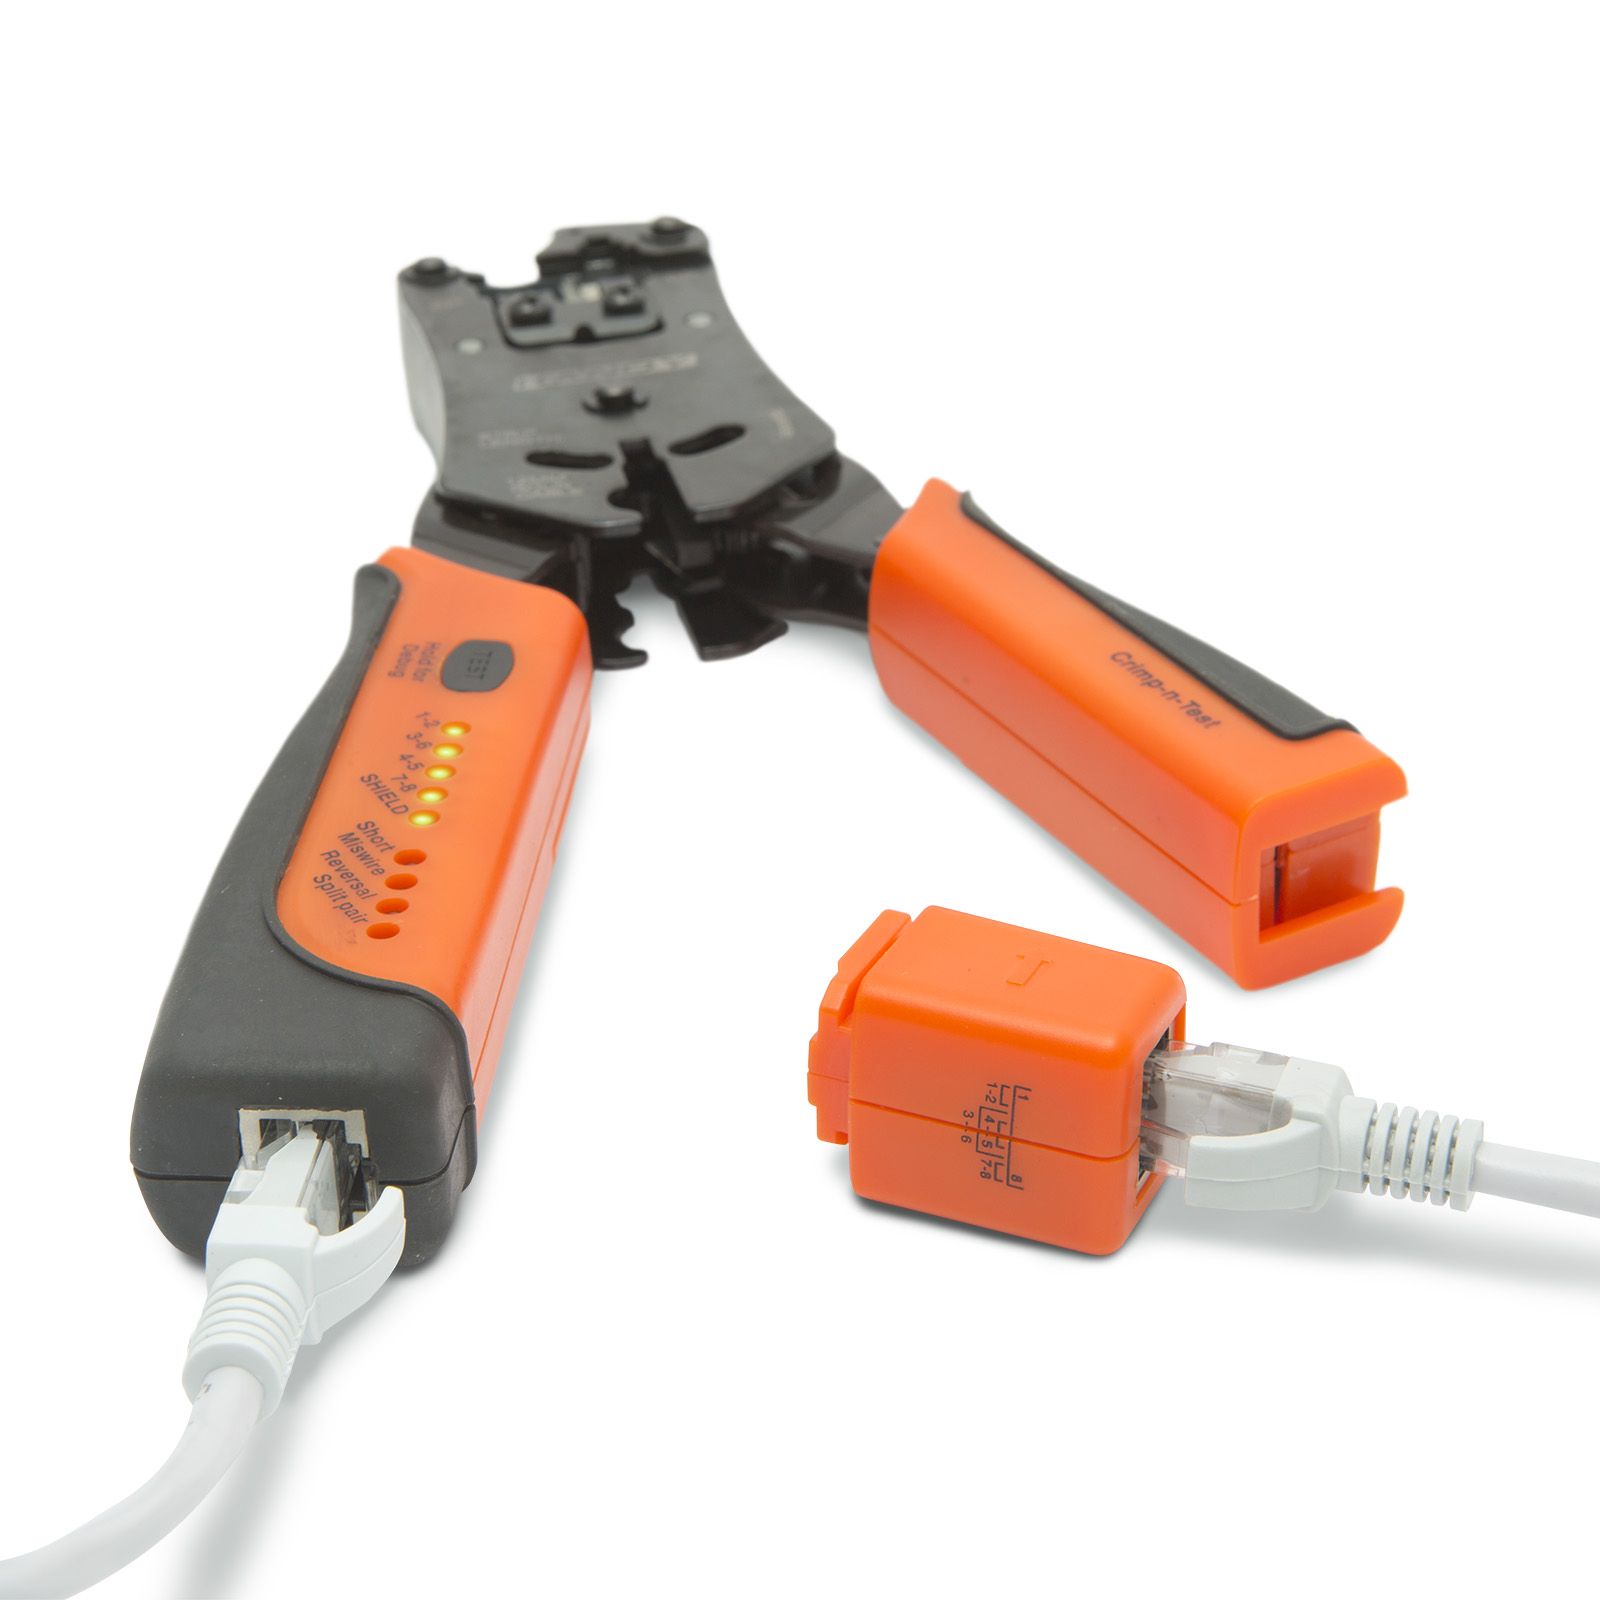 4-In-1 Crimp and Cable Tester thumb